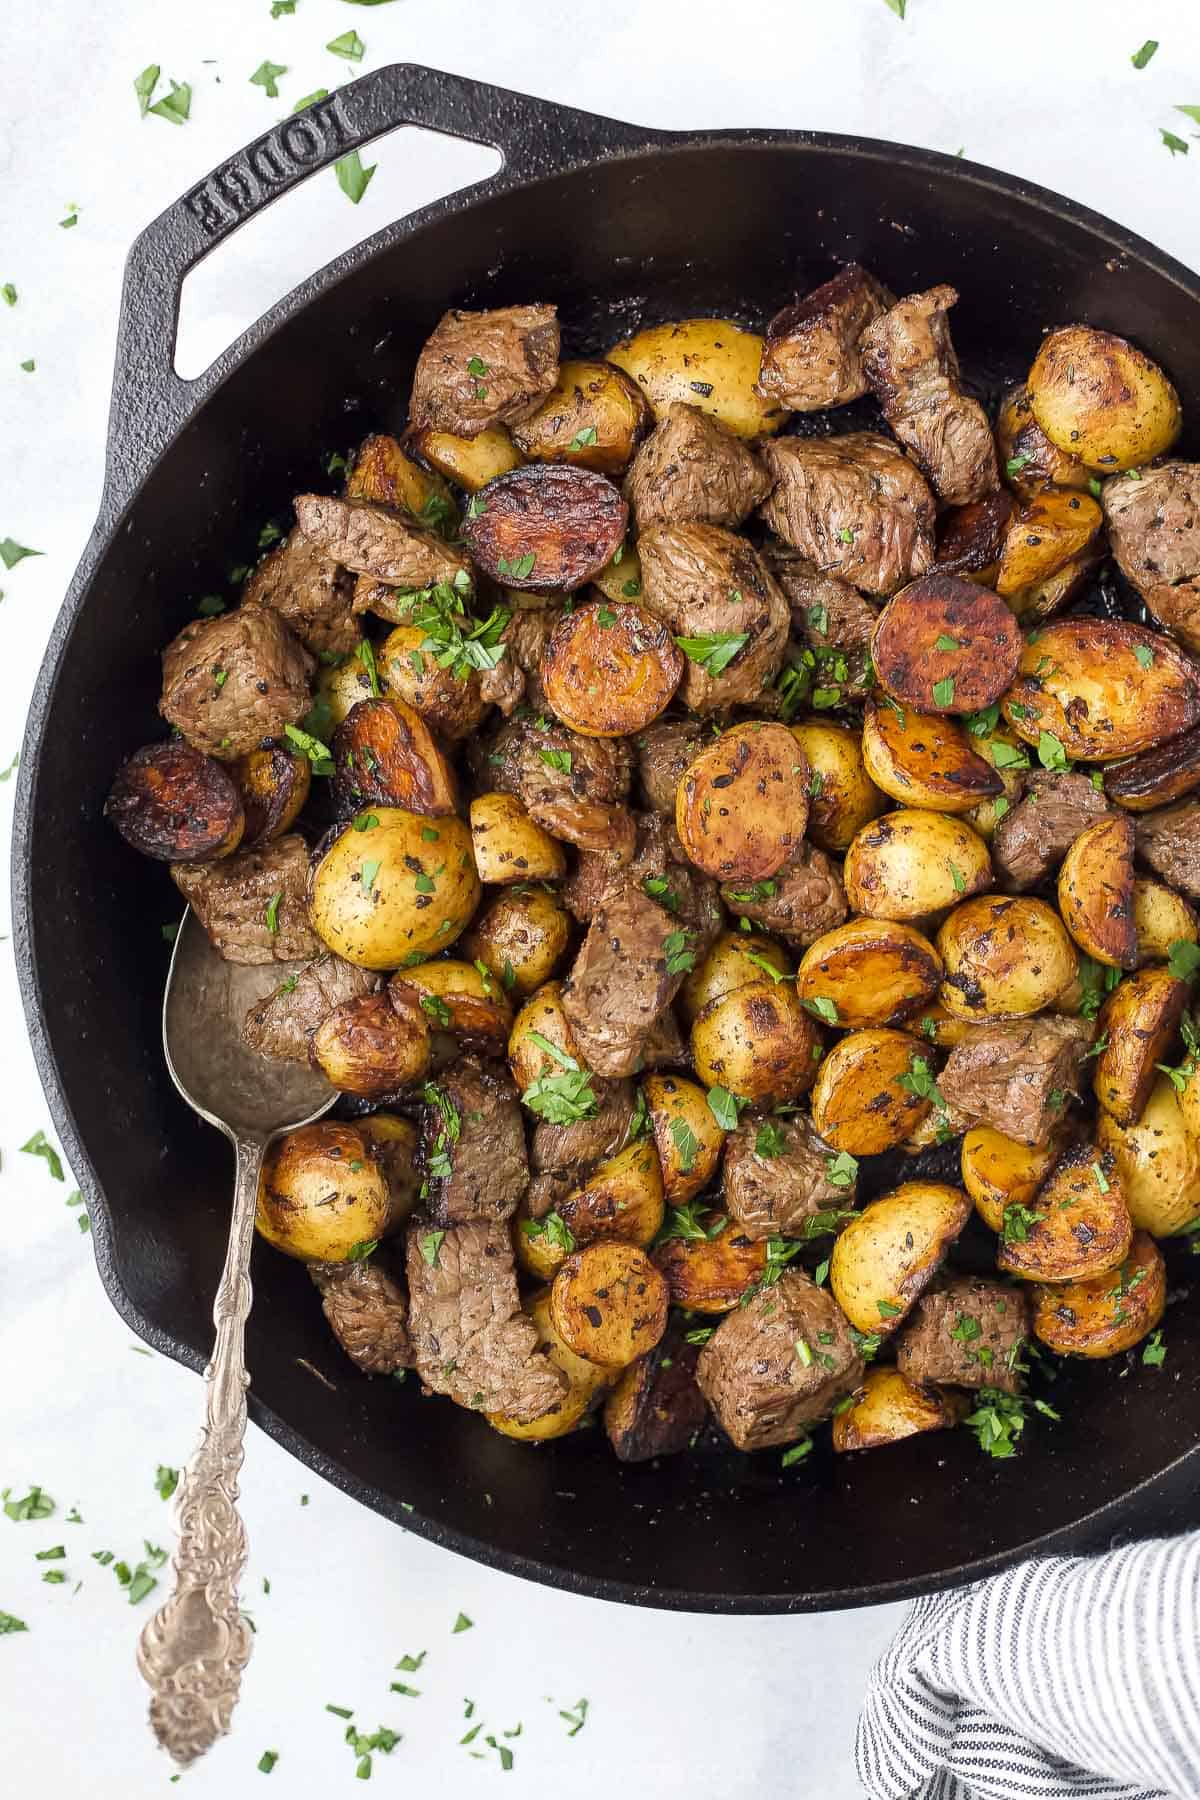 Garlic butter steak bites and baby potatoes in a skillet